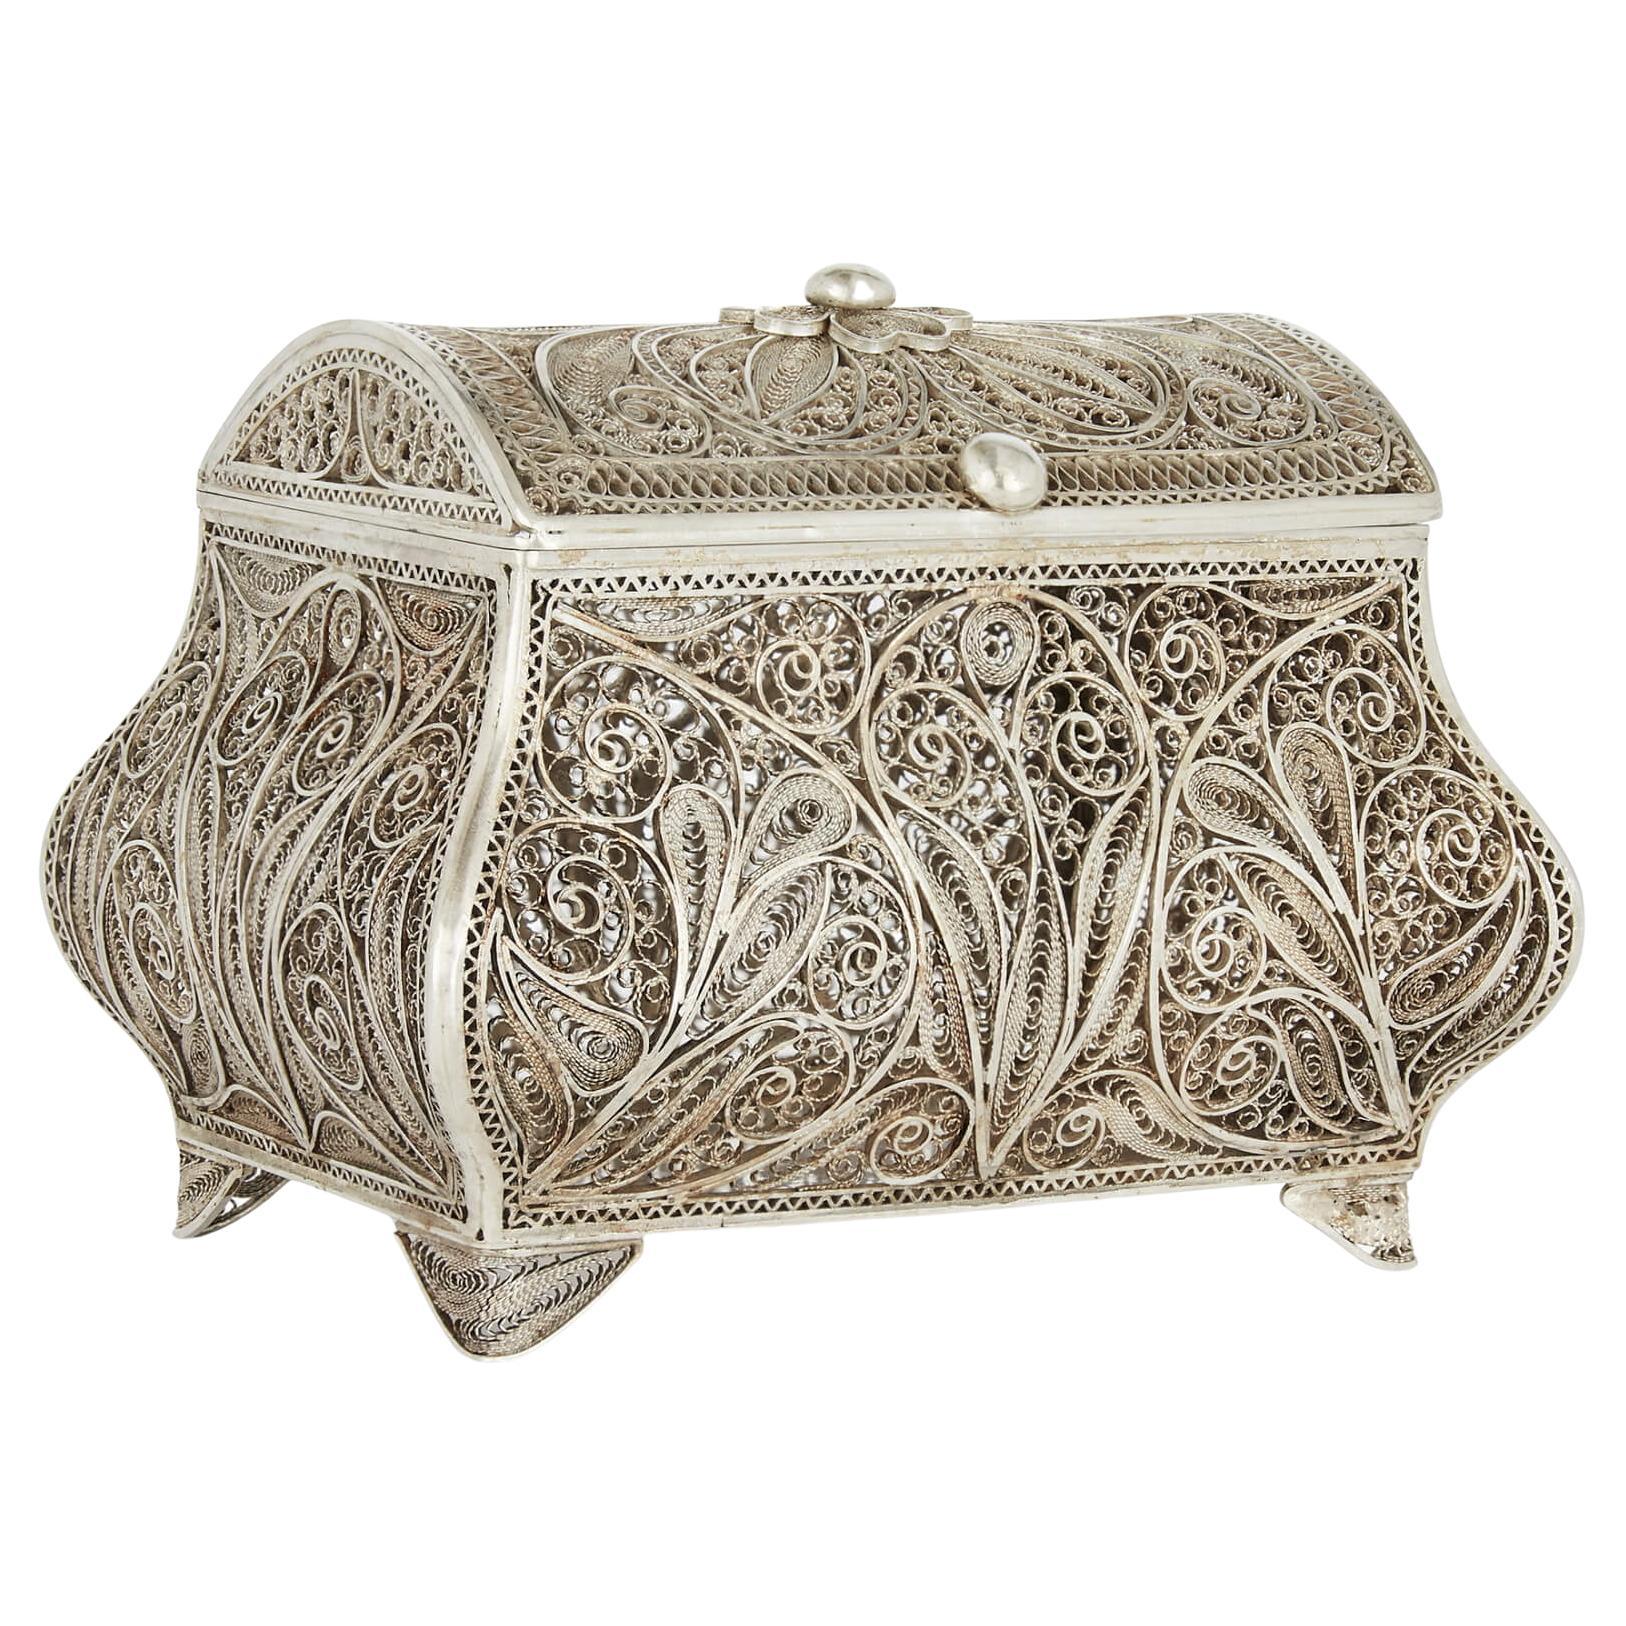 What is a filigree box?